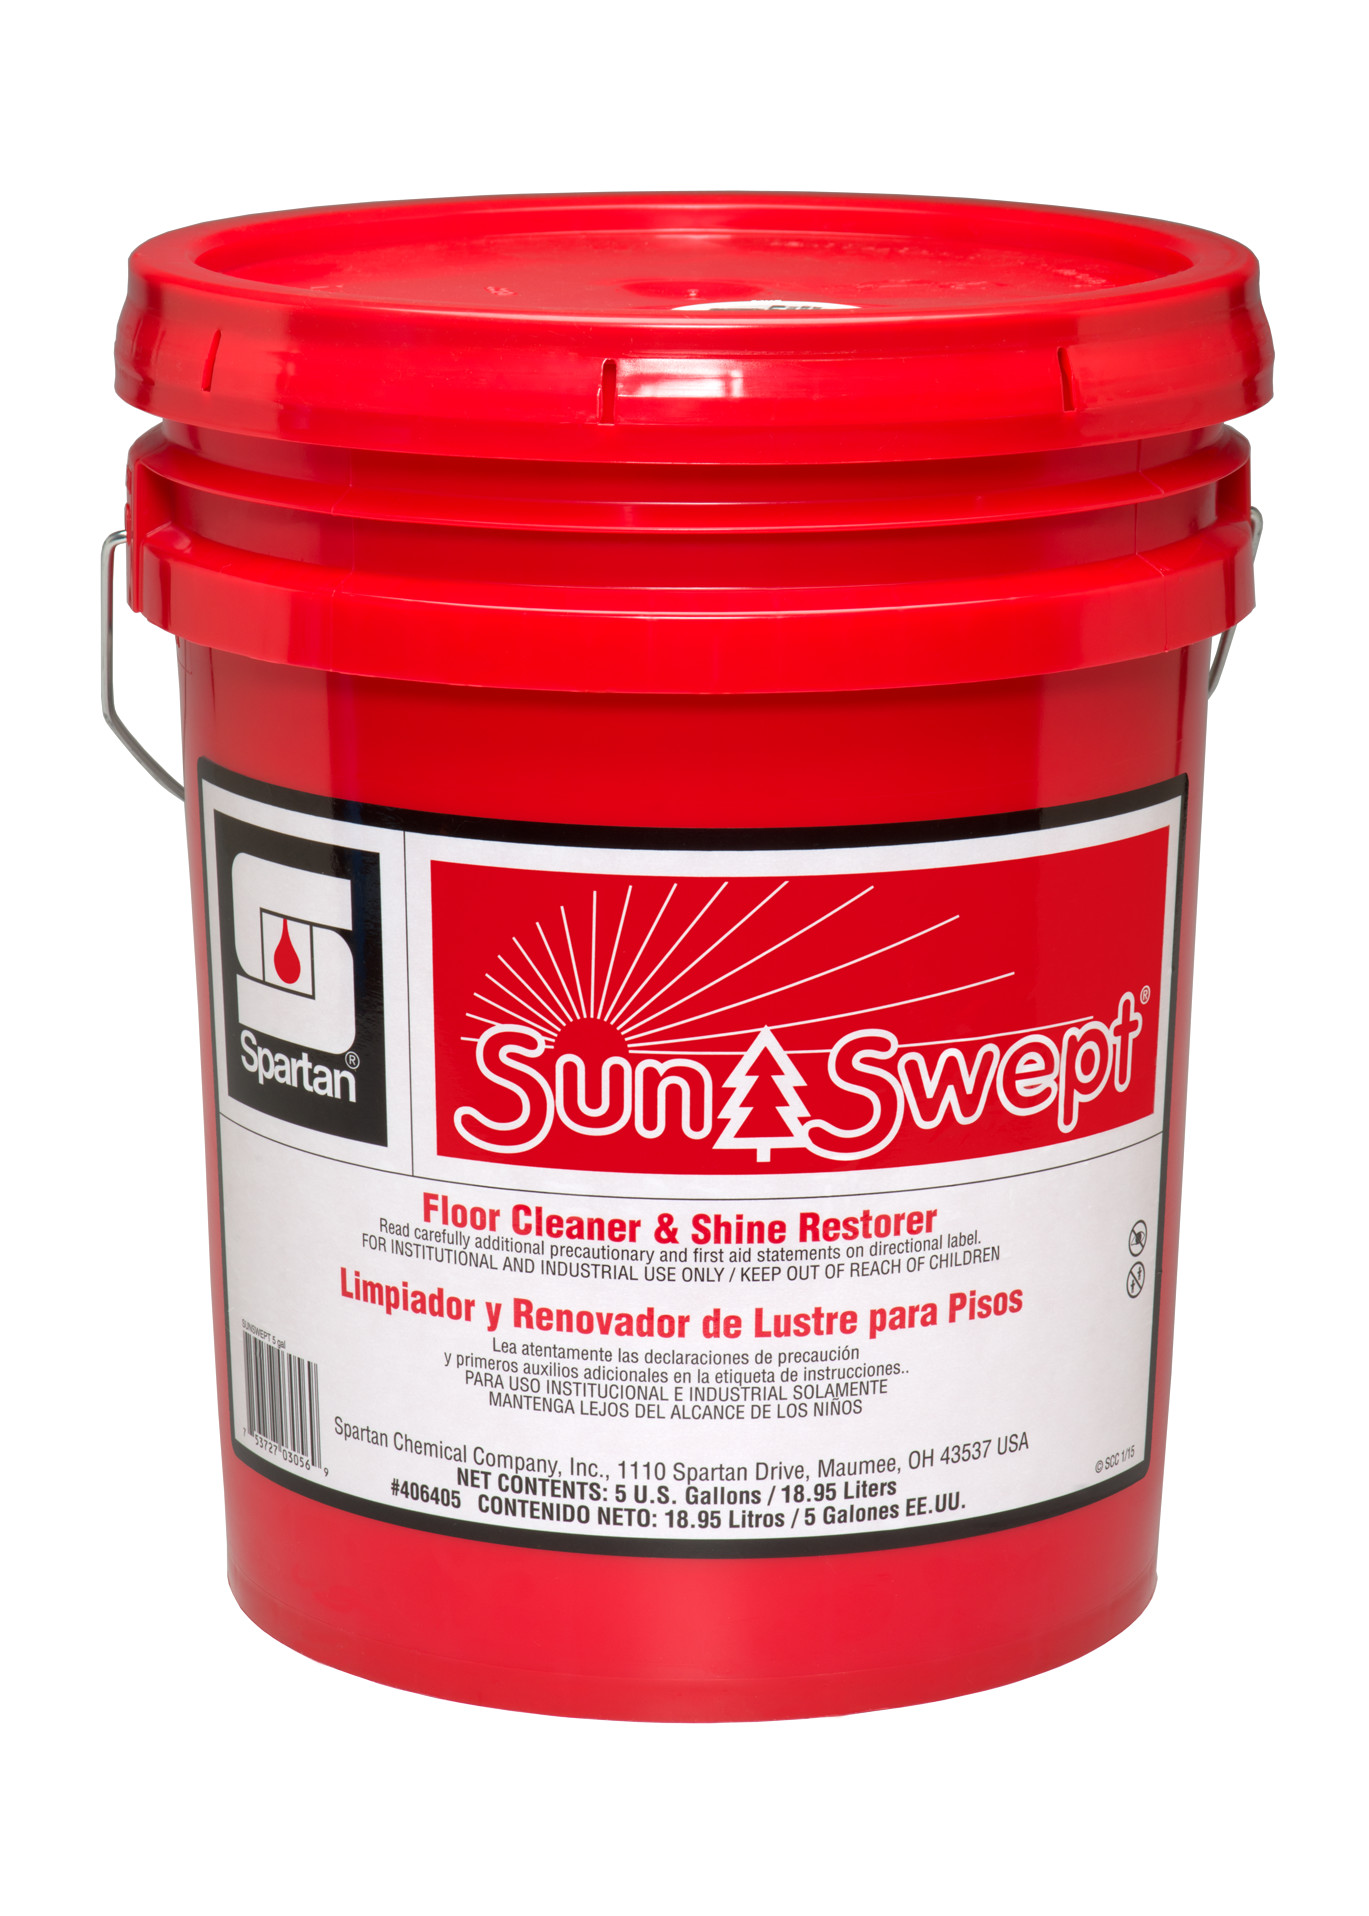 Spartan Chemical Company SunSwept, 5 GAL PAIL